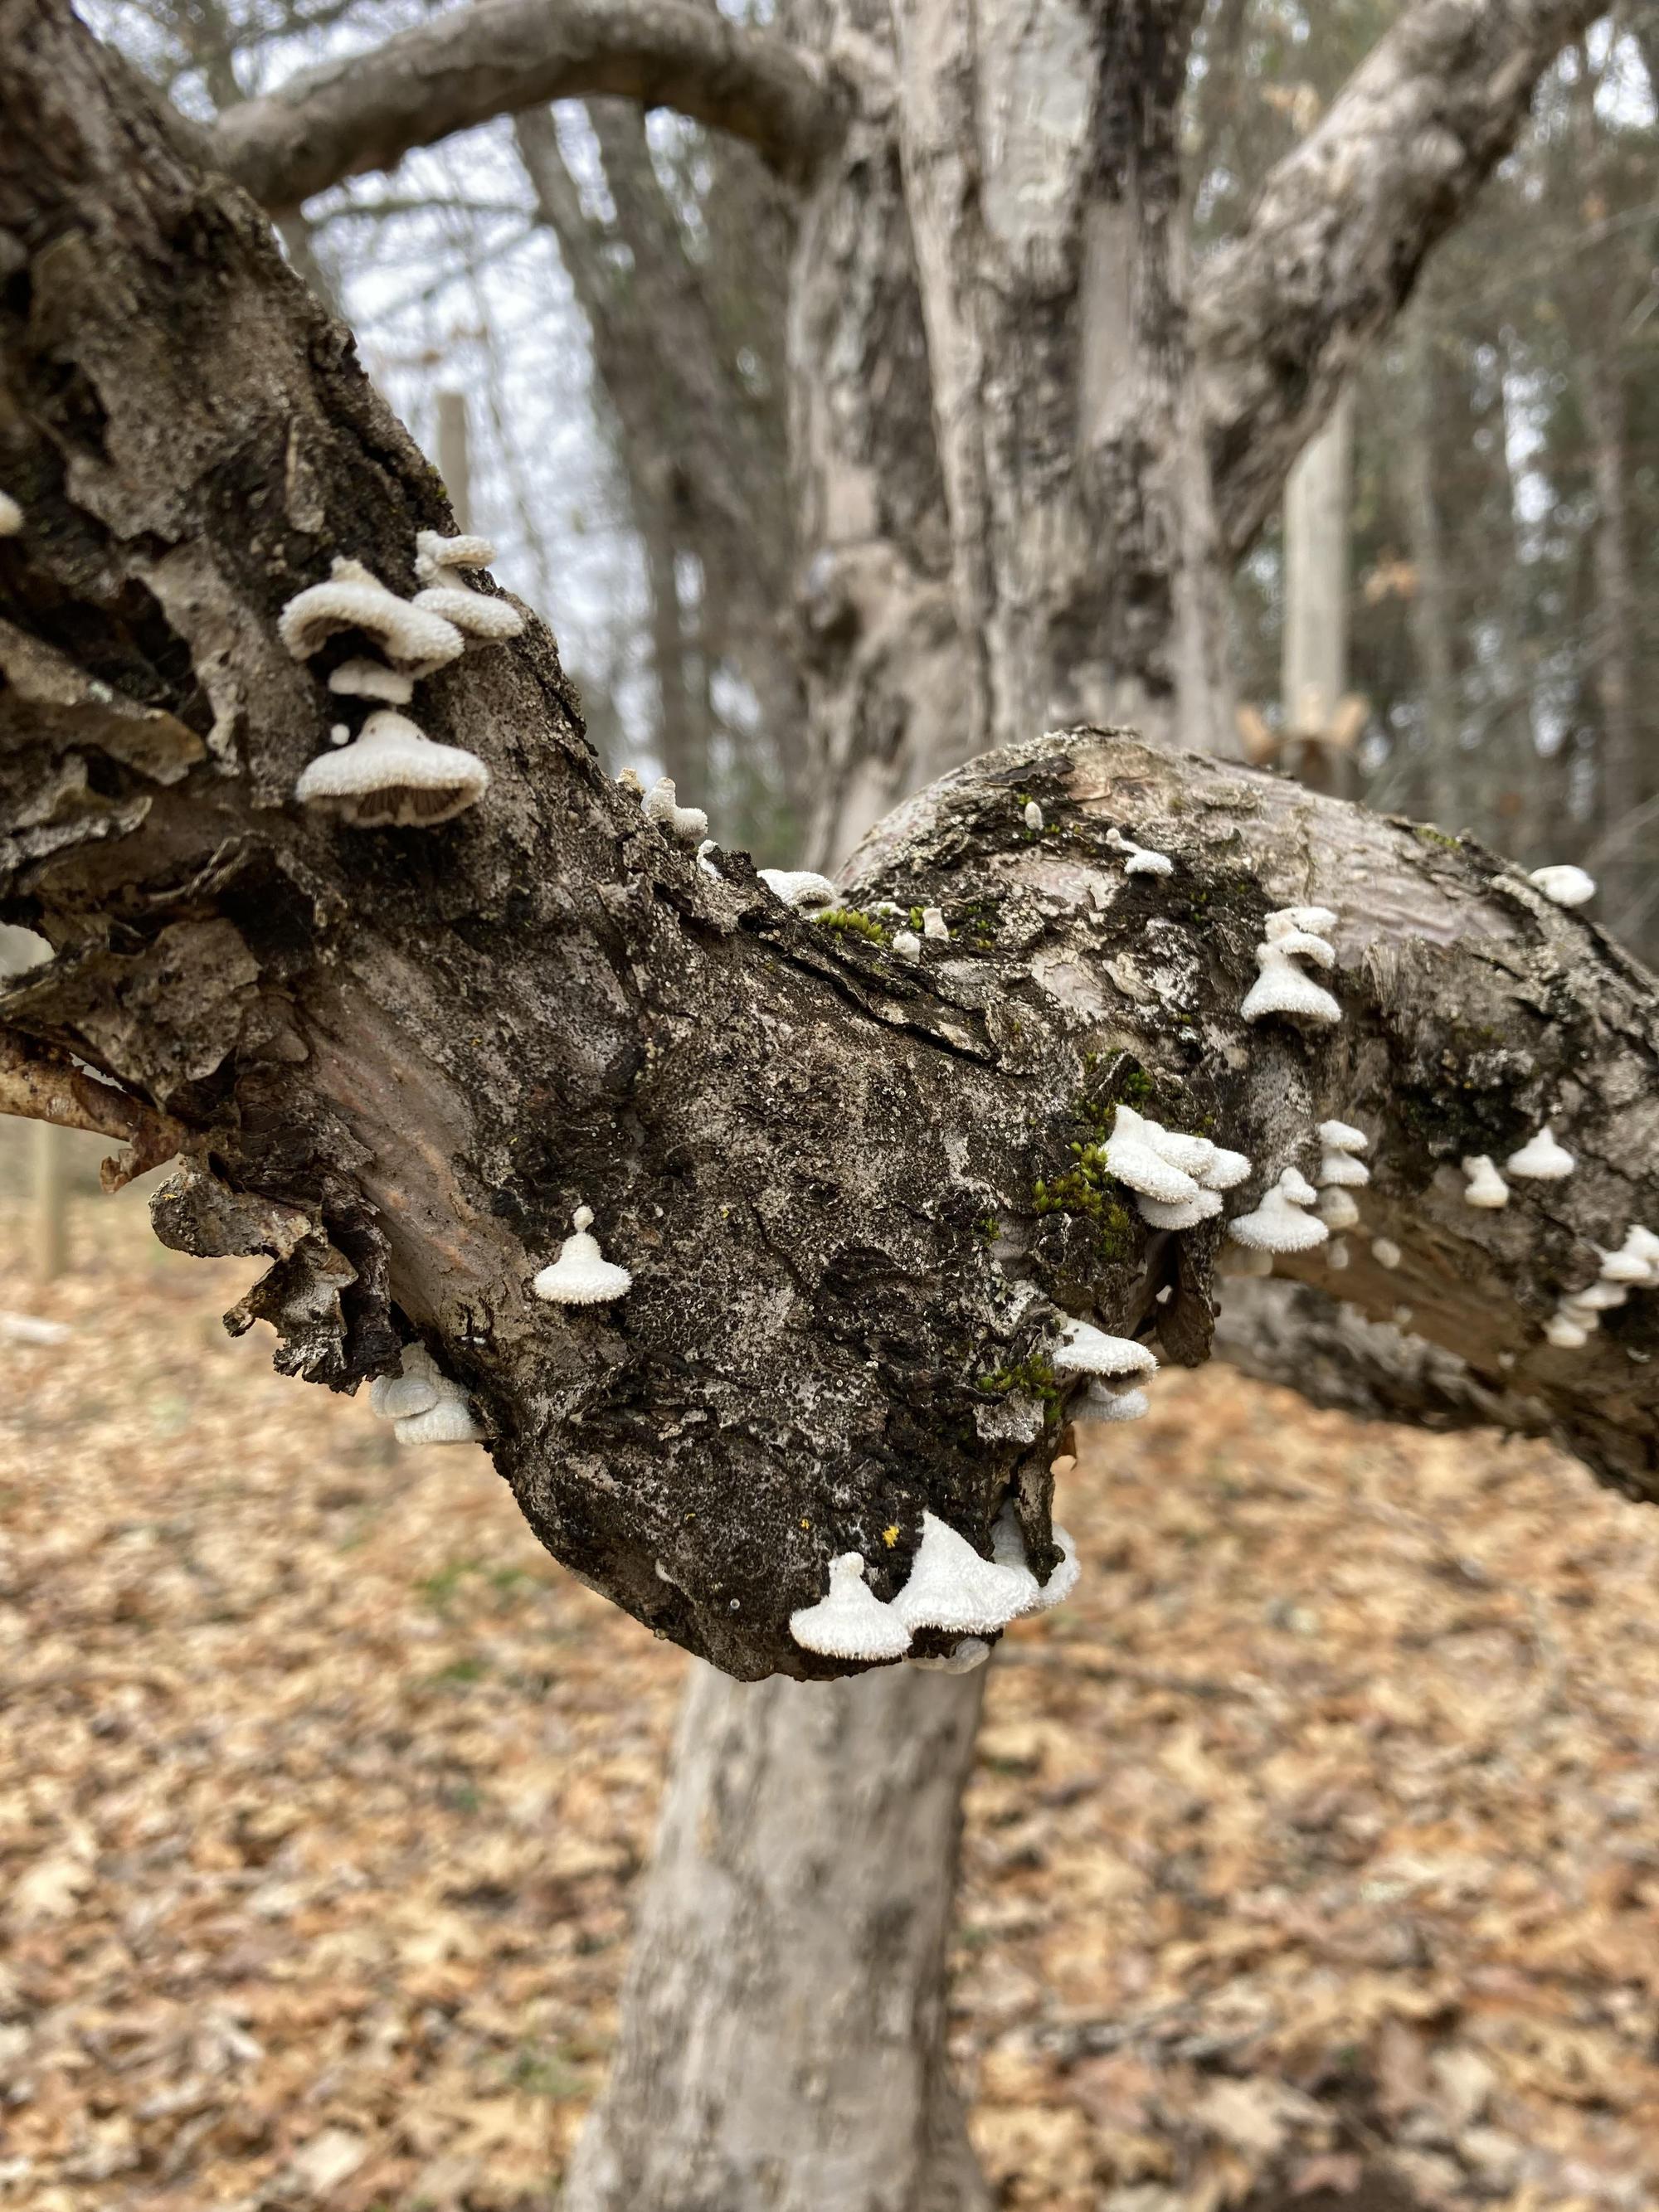 Cankers grow on an apple tree branch